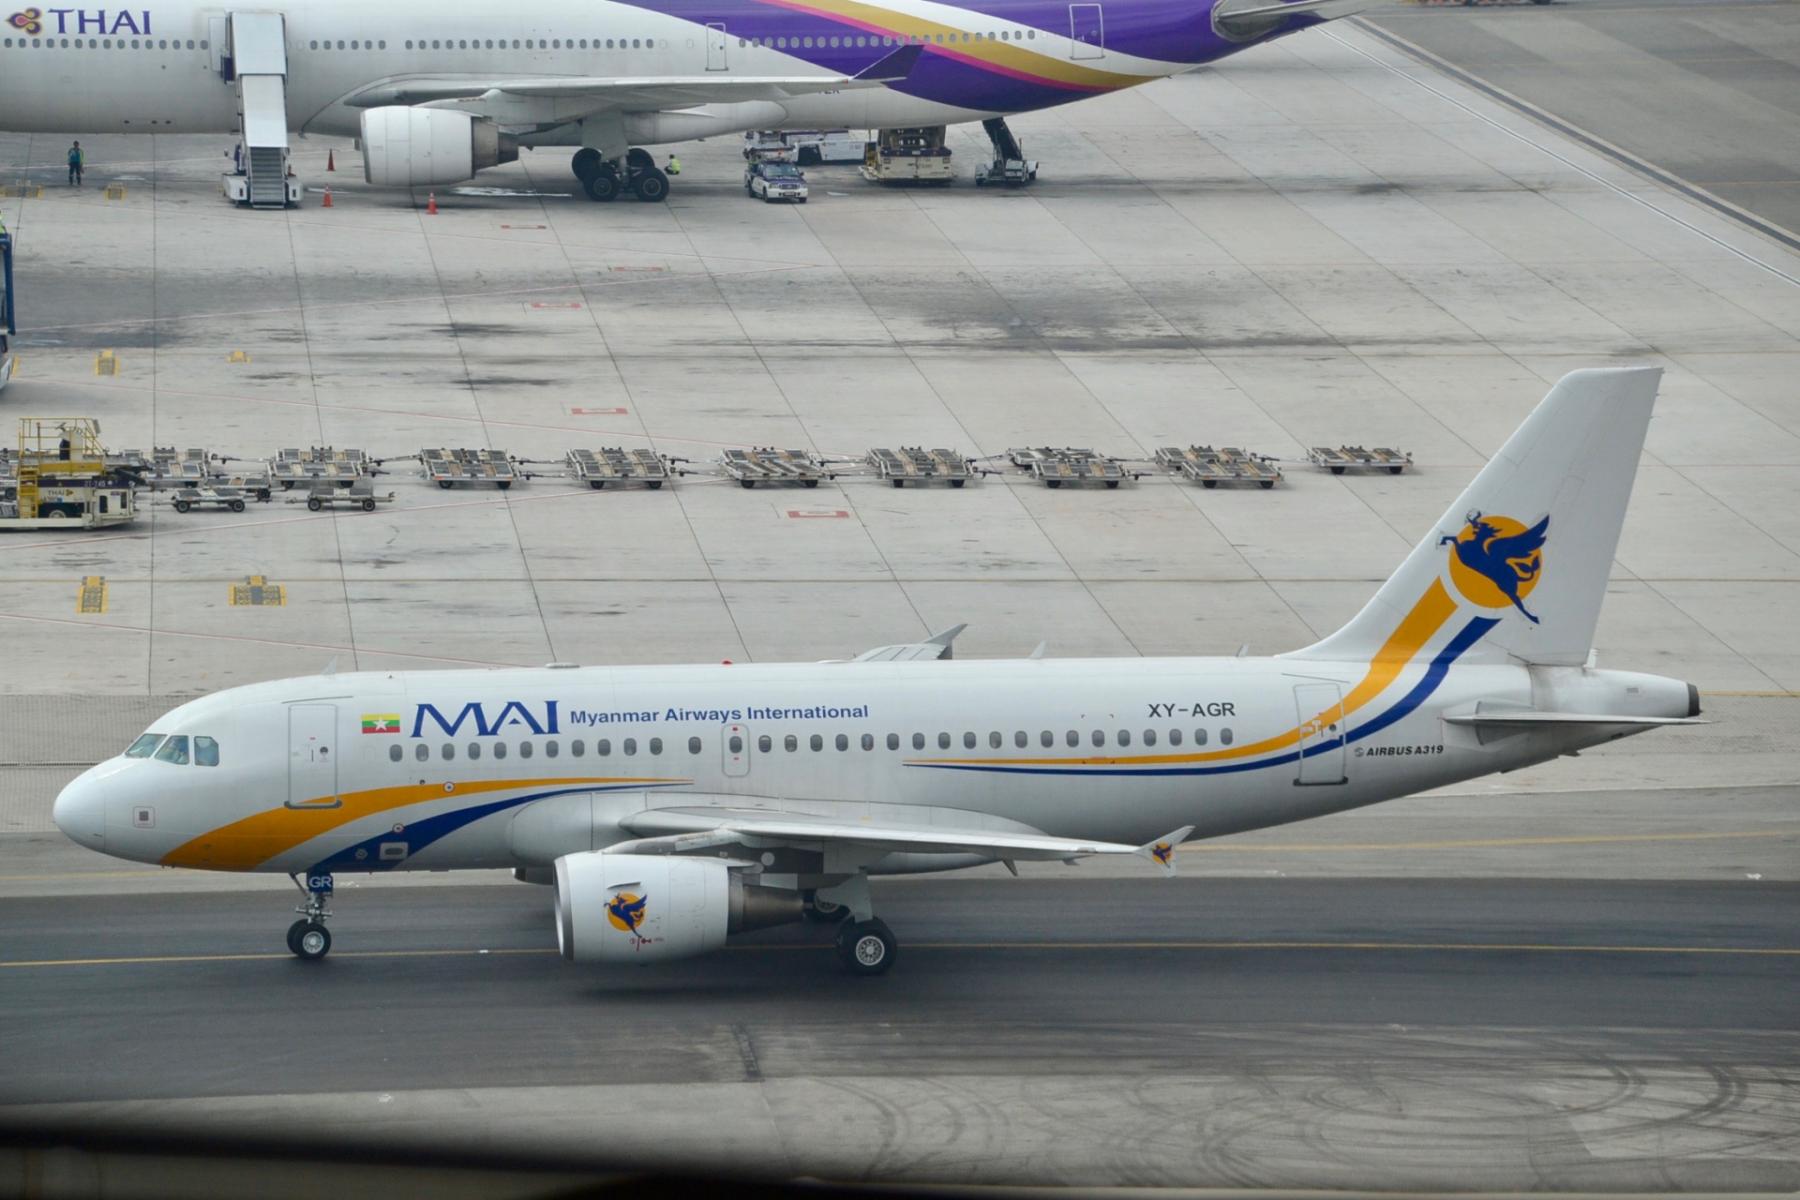 An Airbus A319 acquired by Myanmar’s military from a domestic airline on the runway in Bangkok in 2014 CREDIT: Alec Wilson/Creative Commons